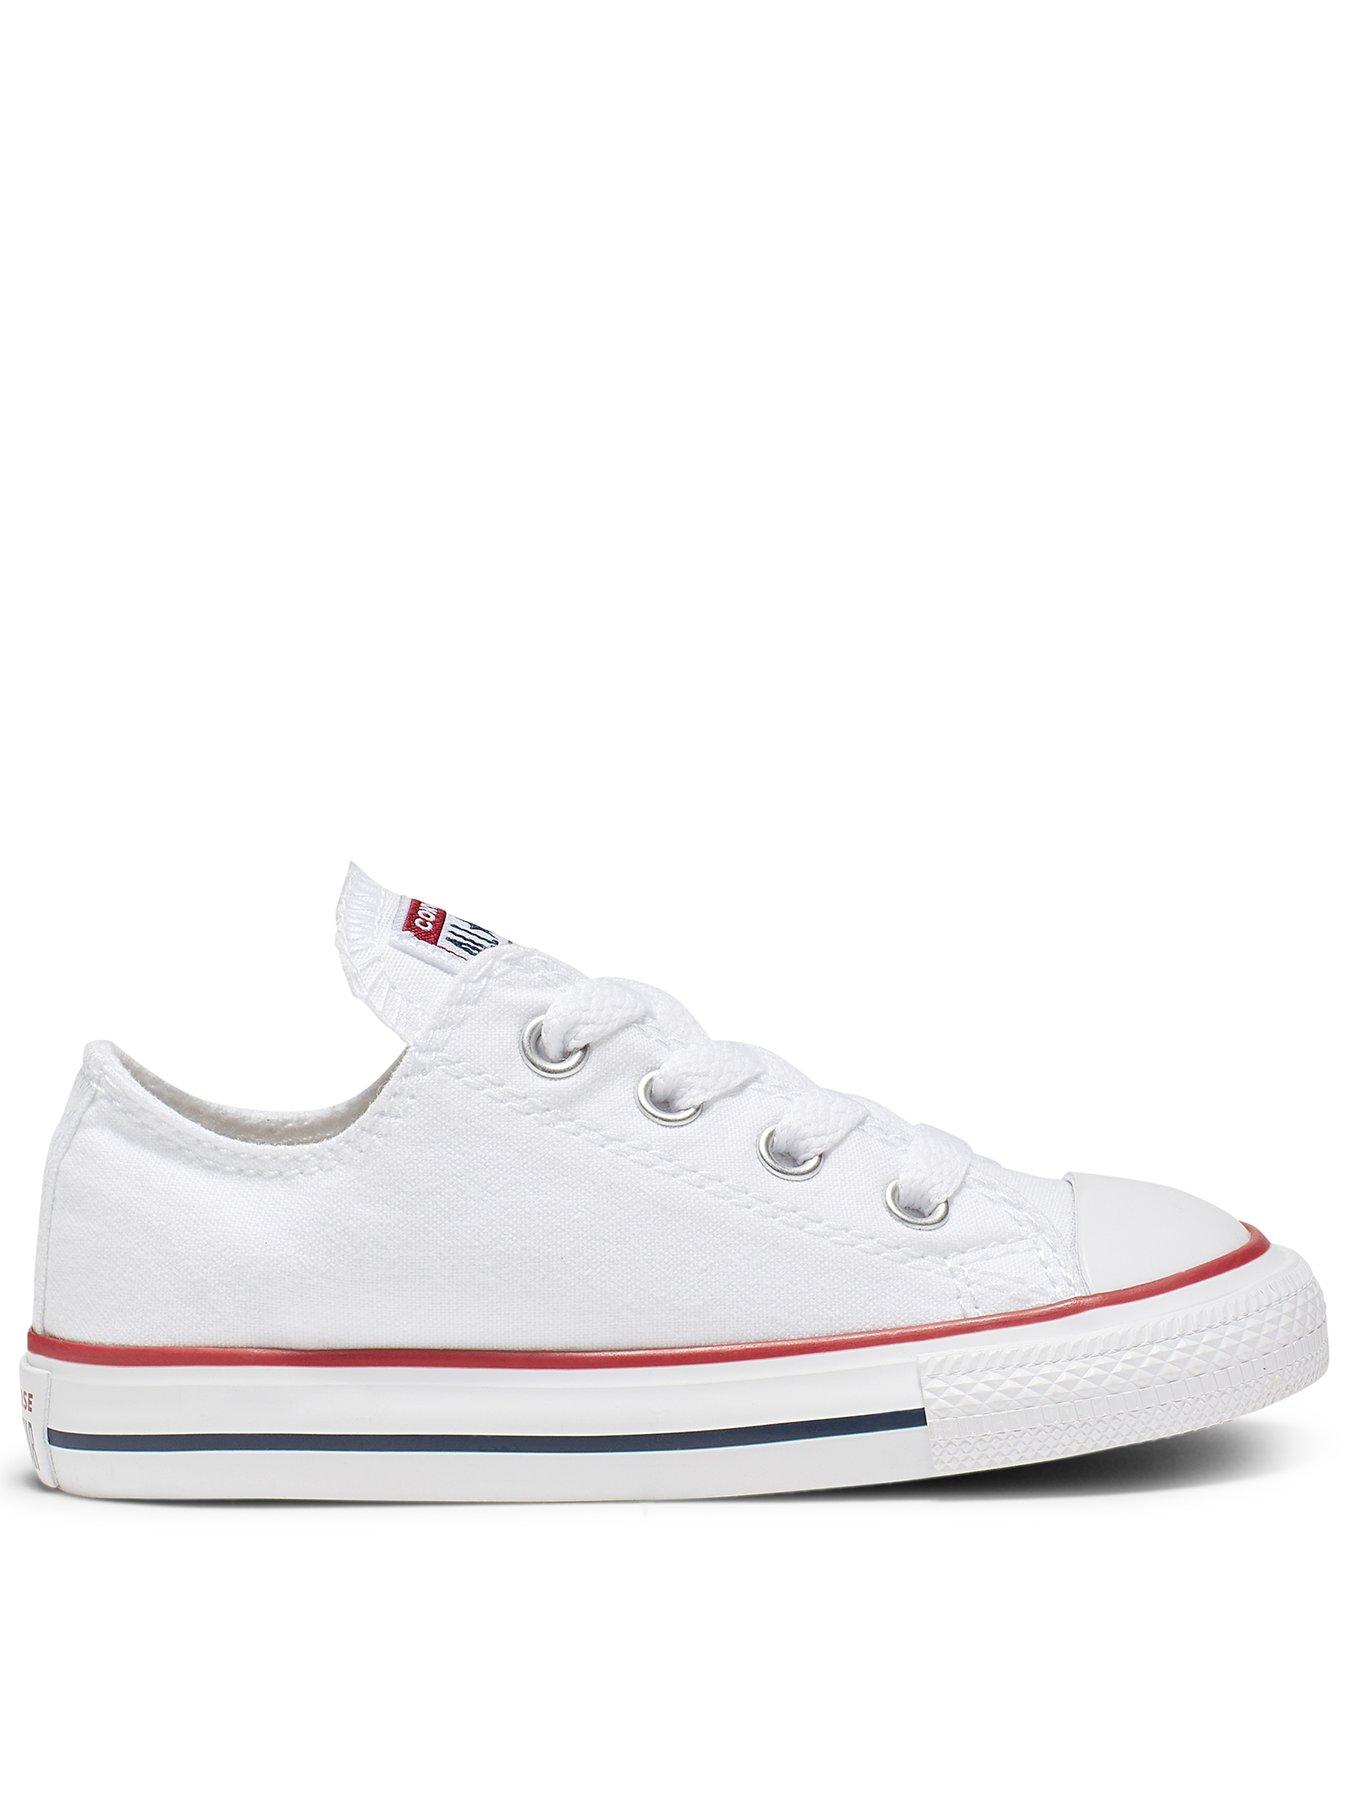 Kids Chuck Taylor All Star Ox Infant Unisex Seasonal Trainers -White